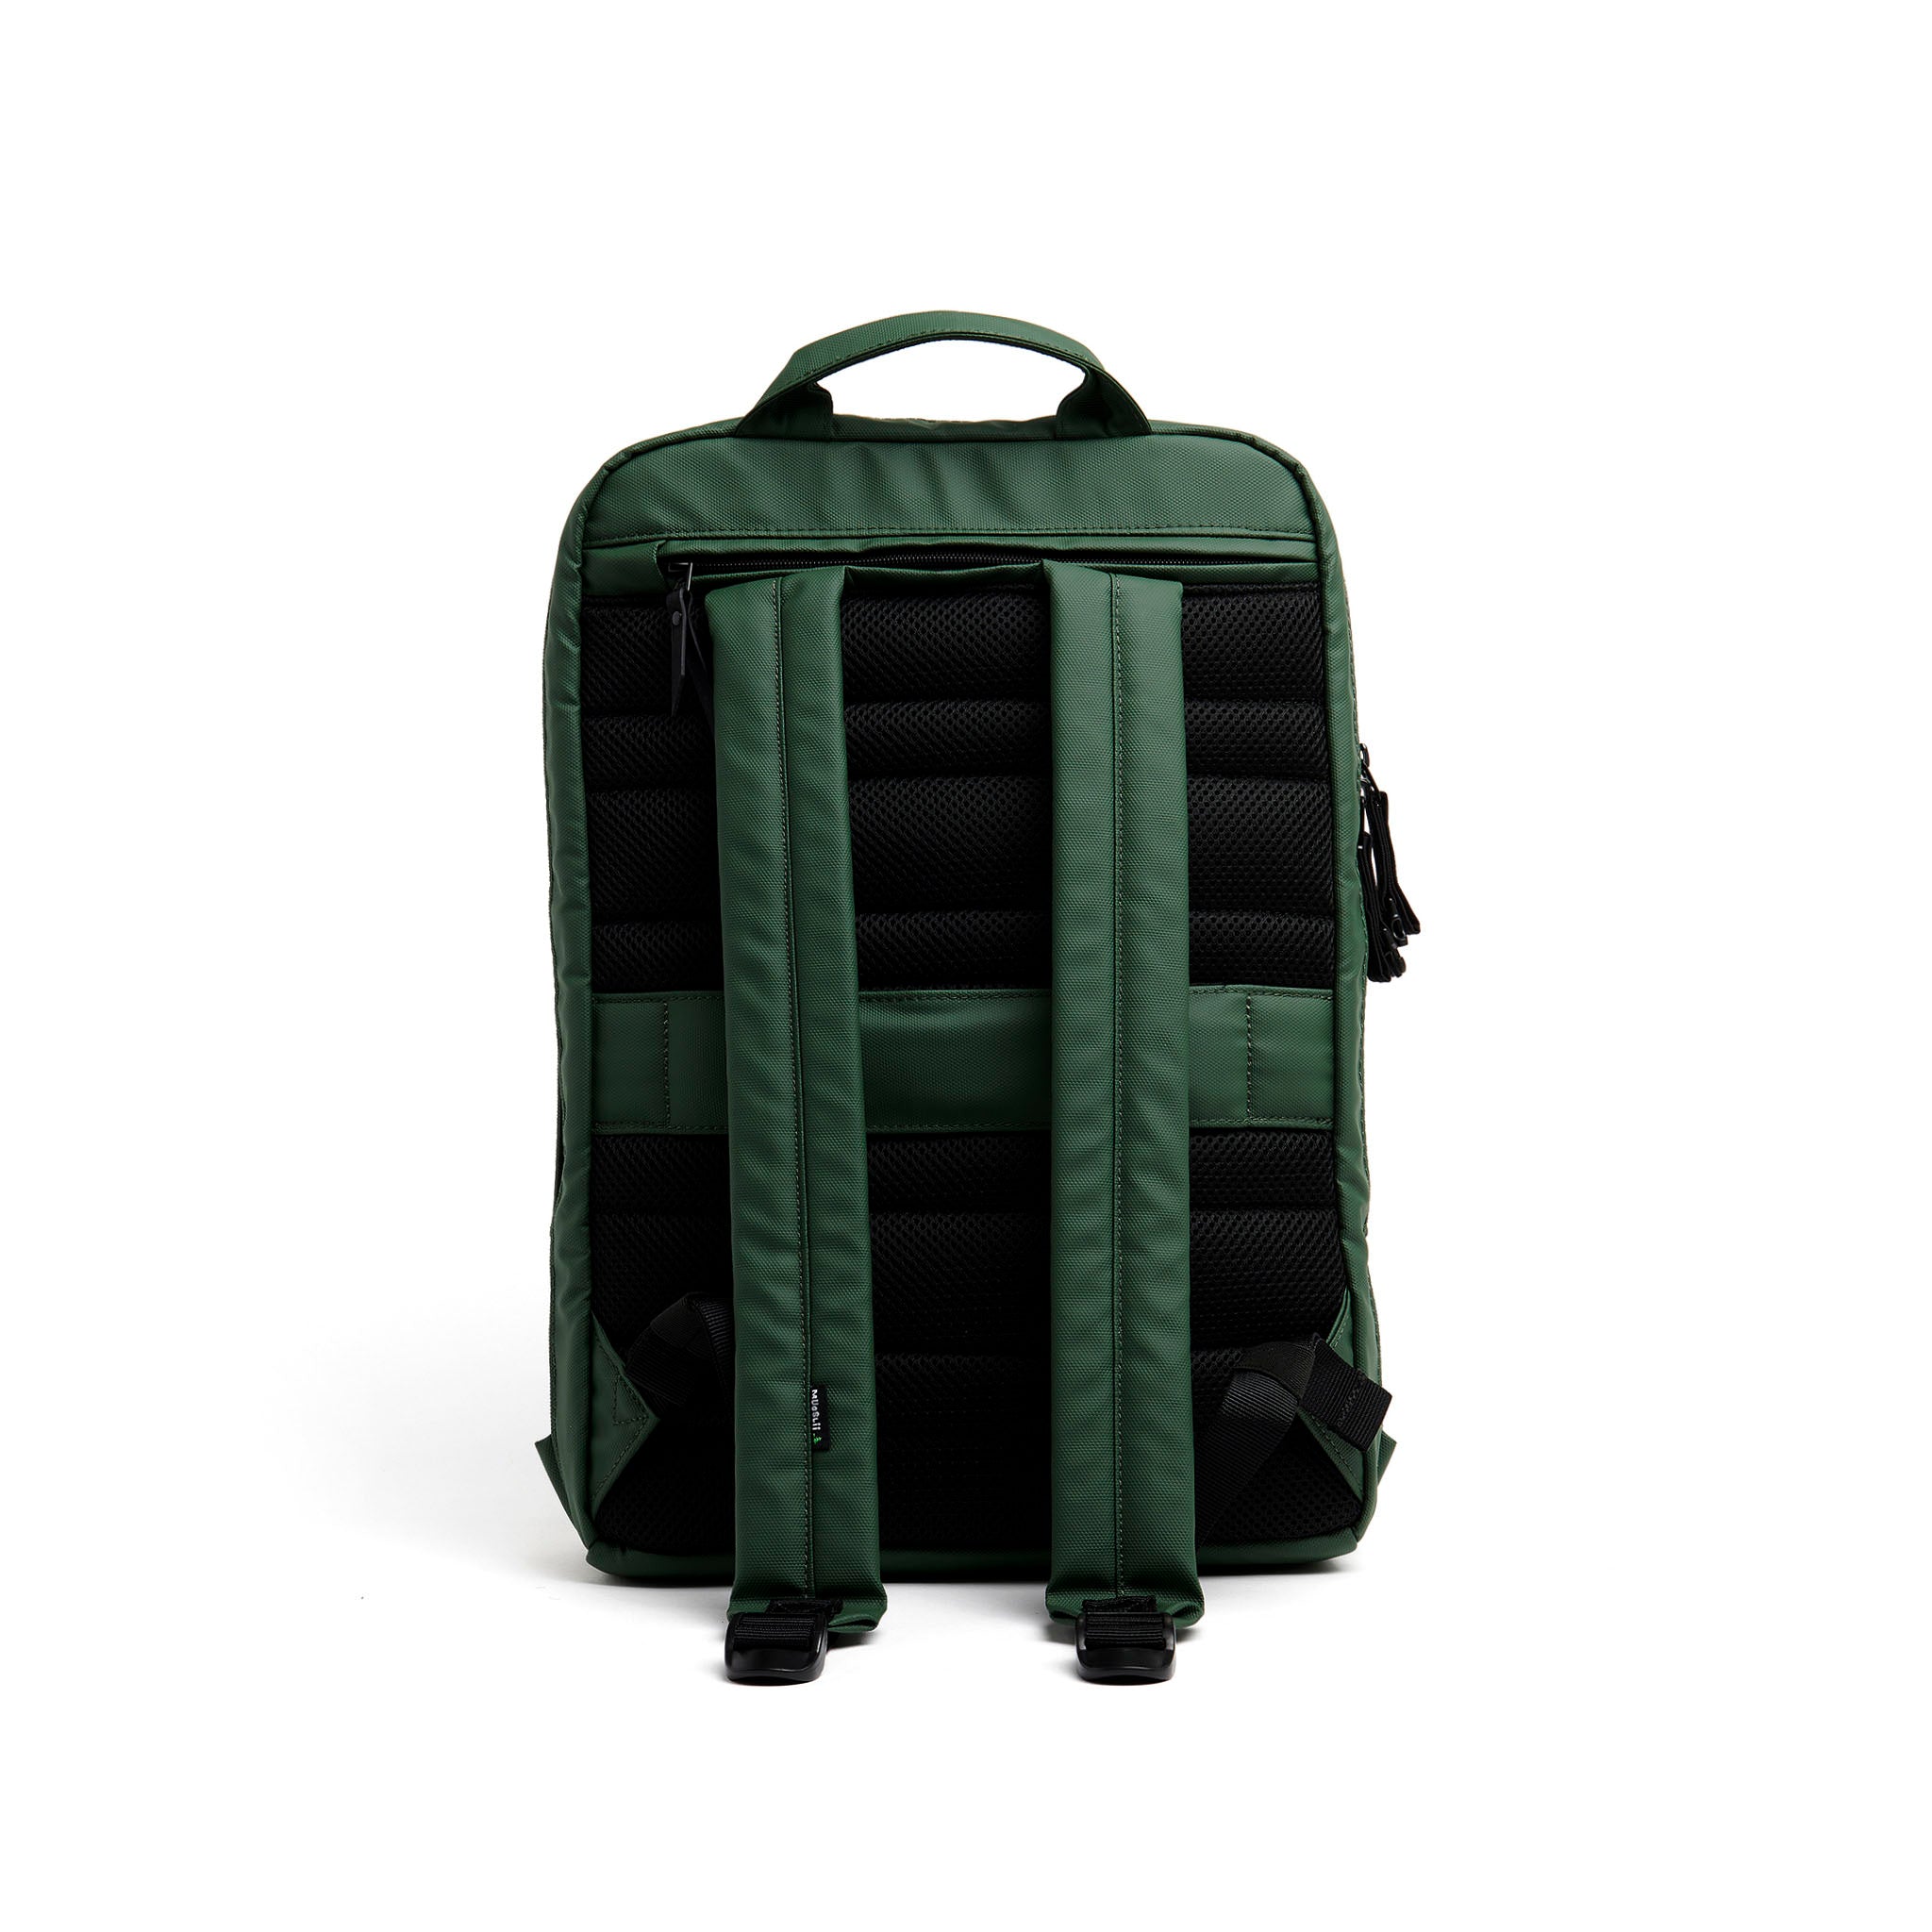 Mueslii daily backpack, made of PU coated waterproof nylon, with a laptop compartment, color green, back view.